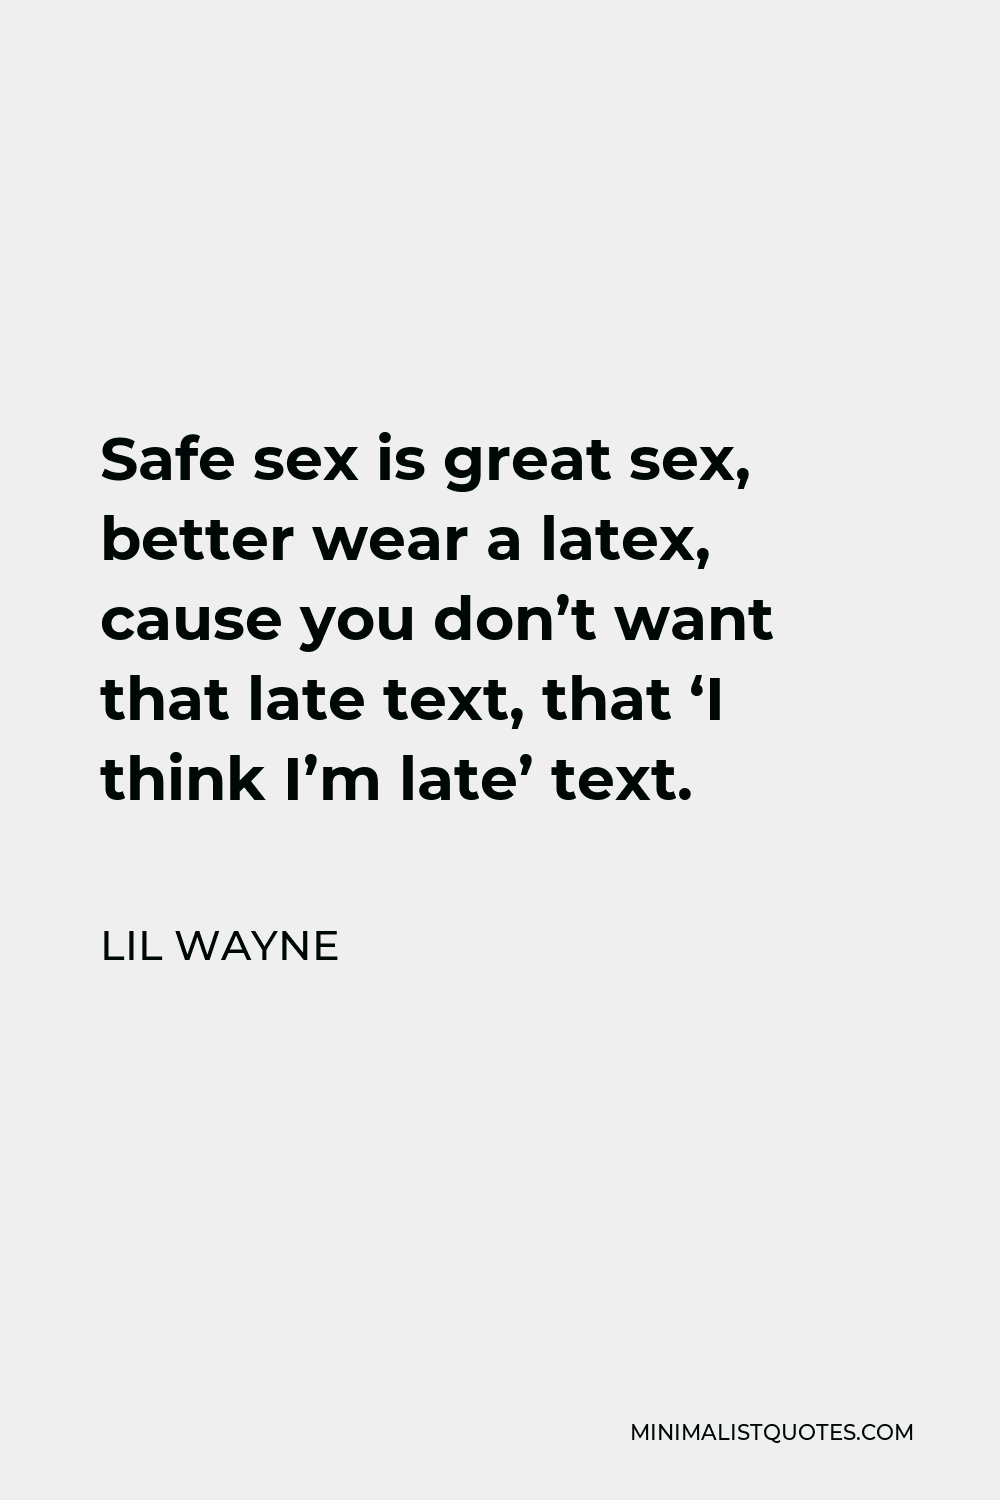 Lil Wayne Quote Safe Sex Is Great Sex Better Wear A Latex Cause You 